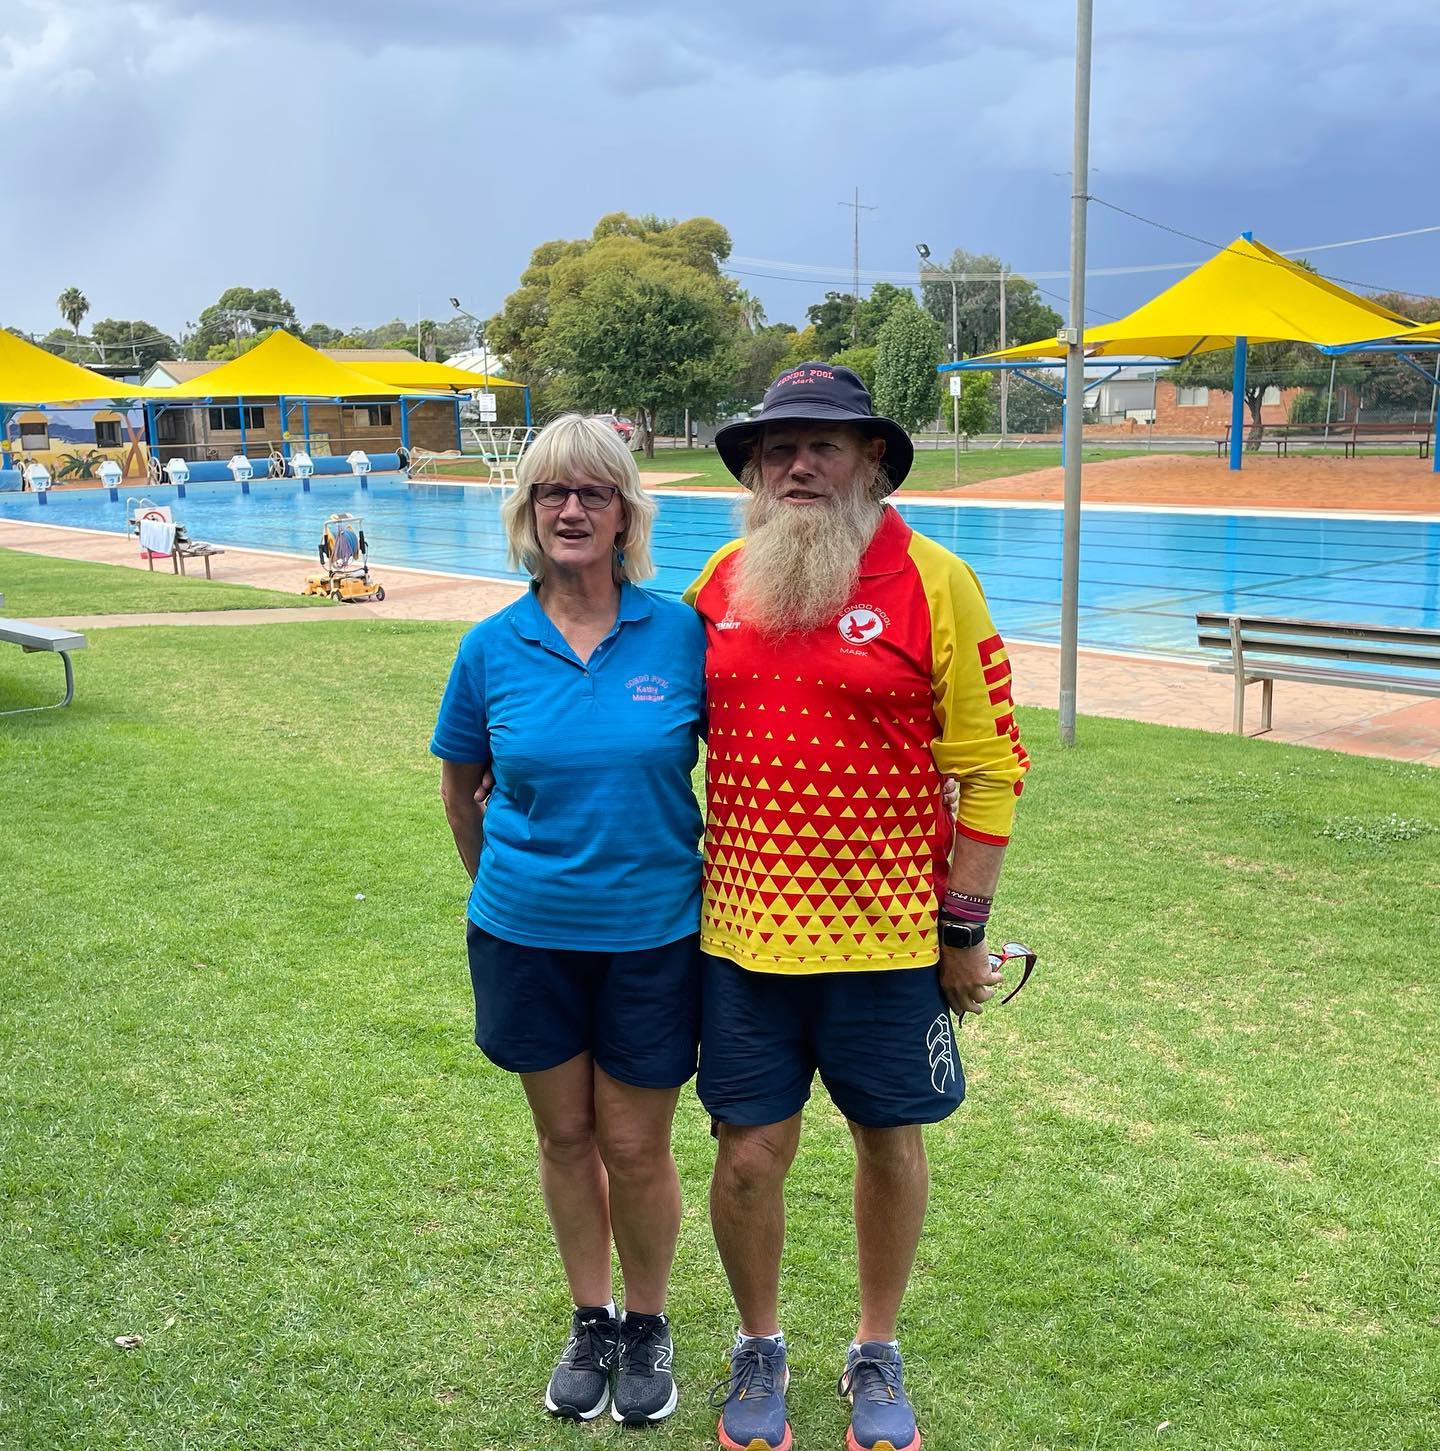 Kathy and Mark Thorpe have decided to take on new challenges after being managers of the Condobolin Swimming pool for the past 27 years. Image Credit: Condobolin Swimming Pool Facebook Page